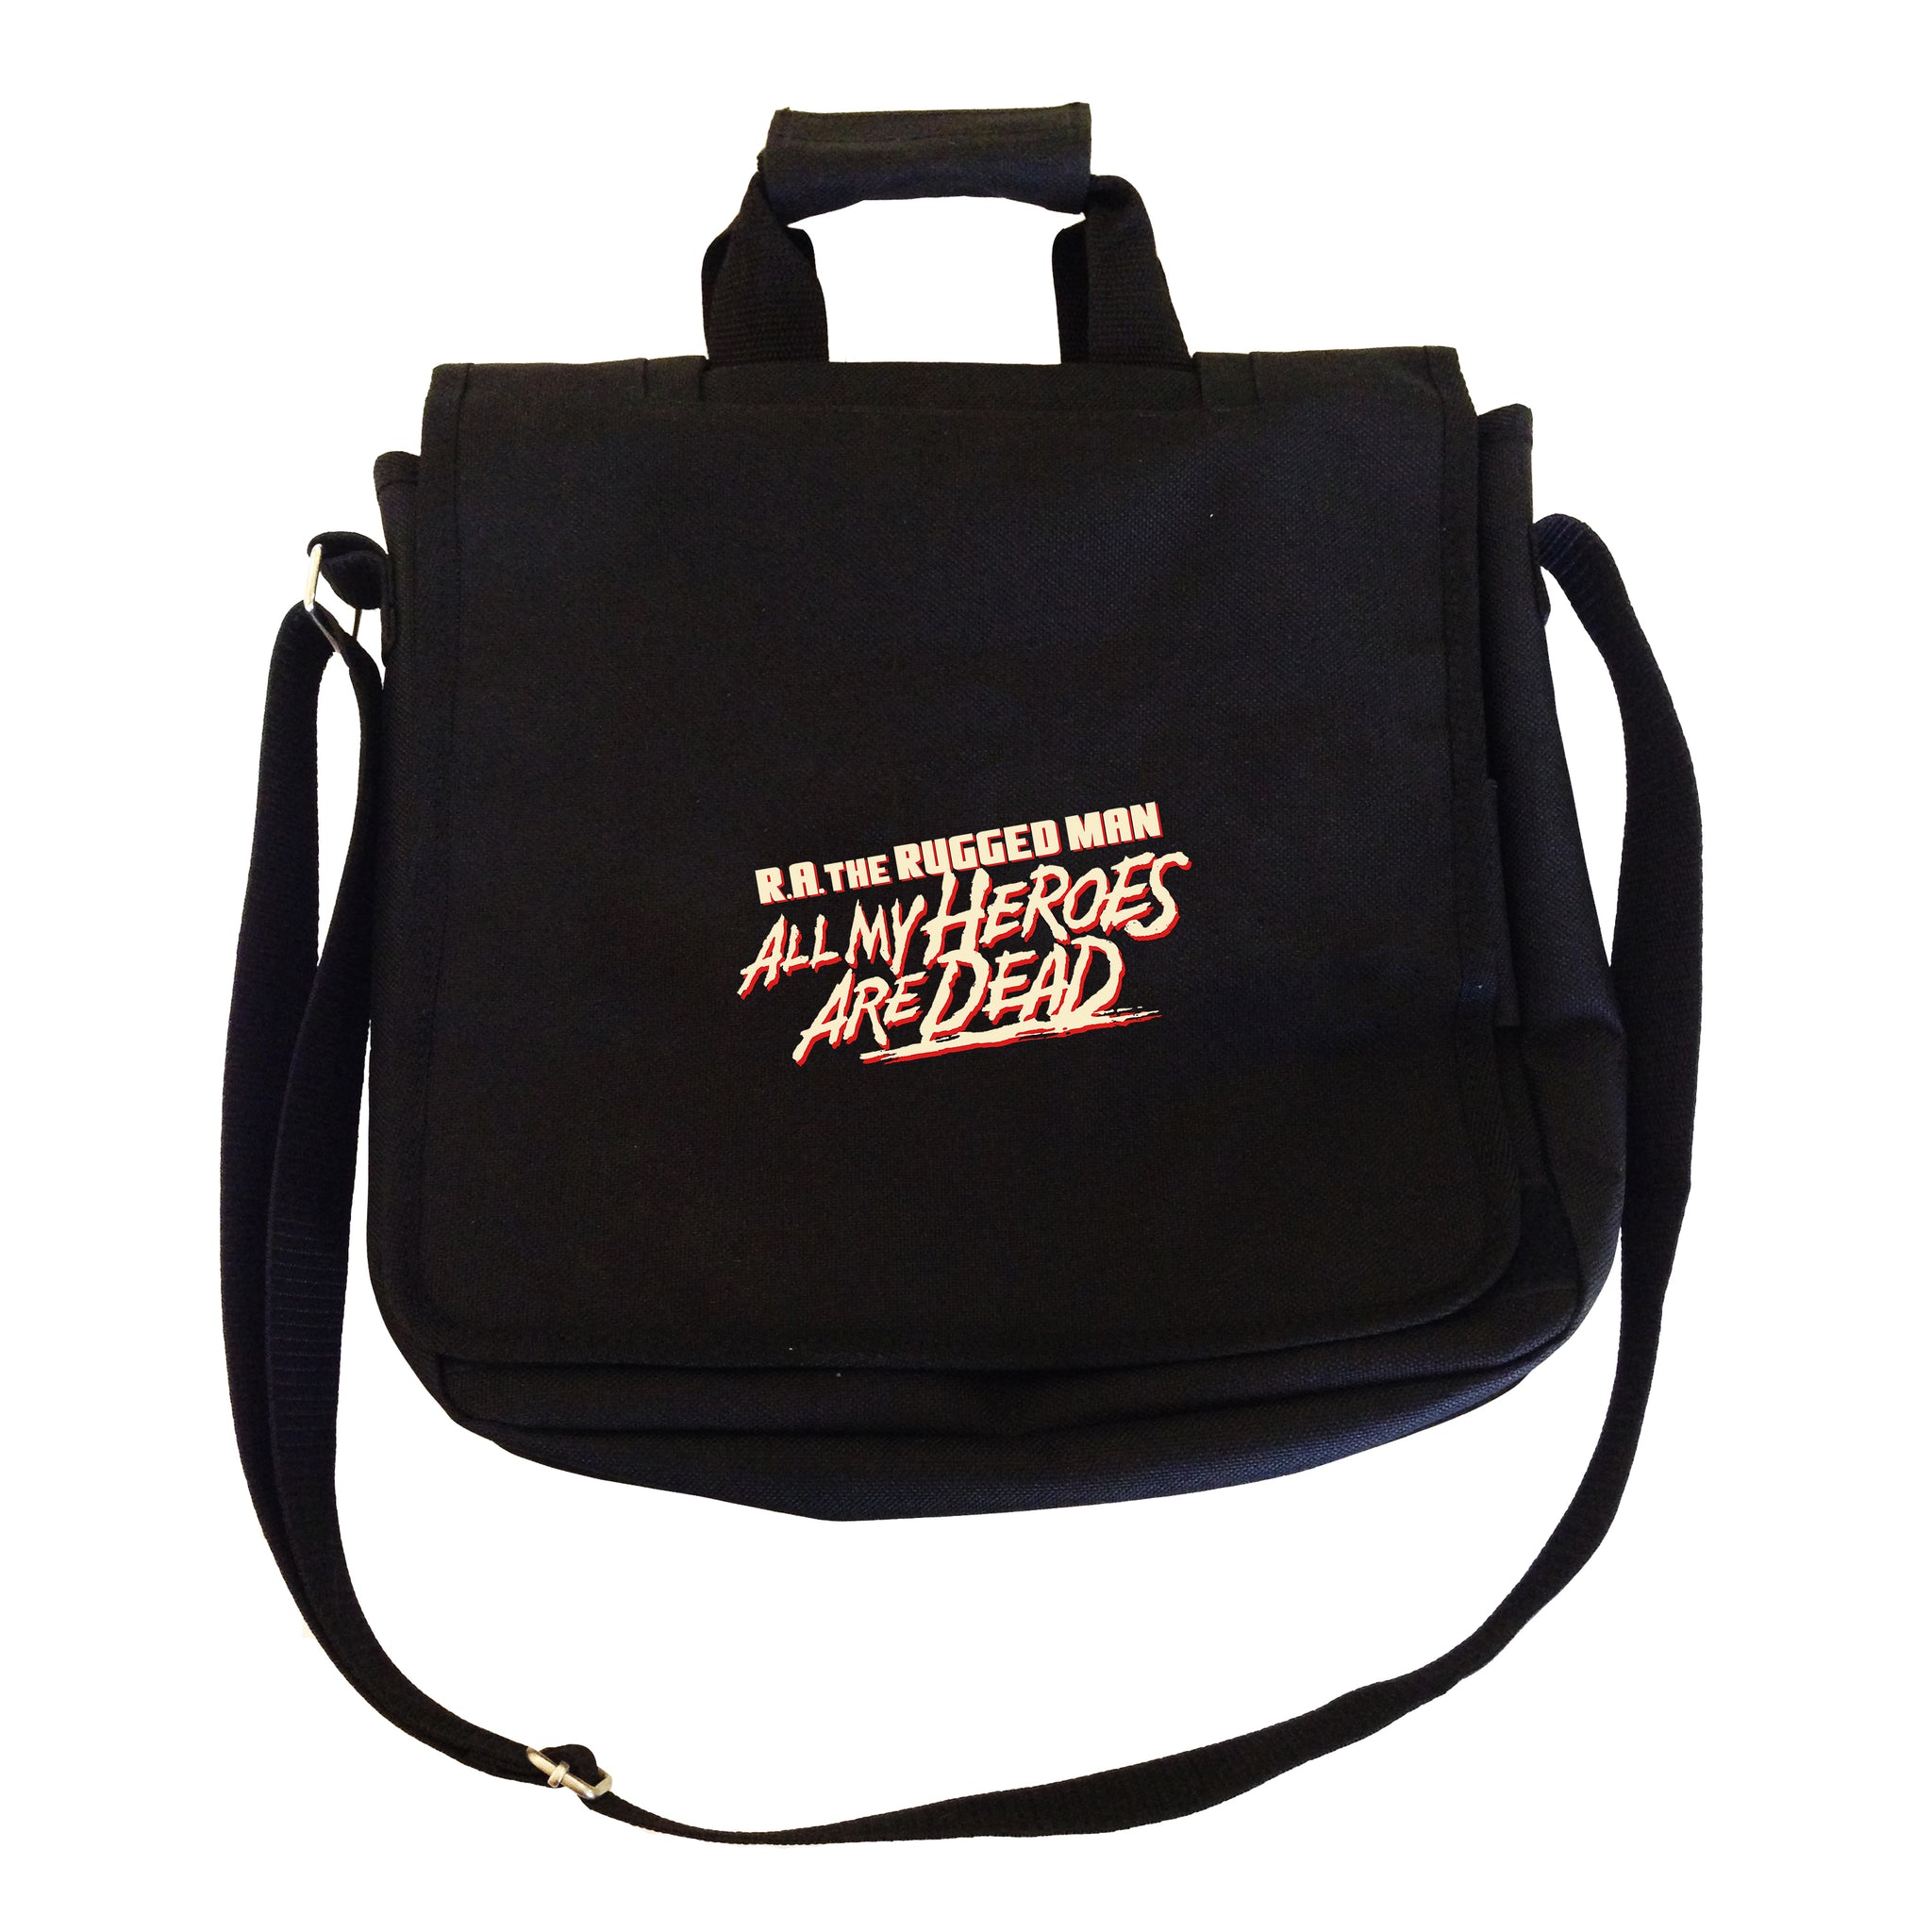 All My Heroes Are Dead Record Bag